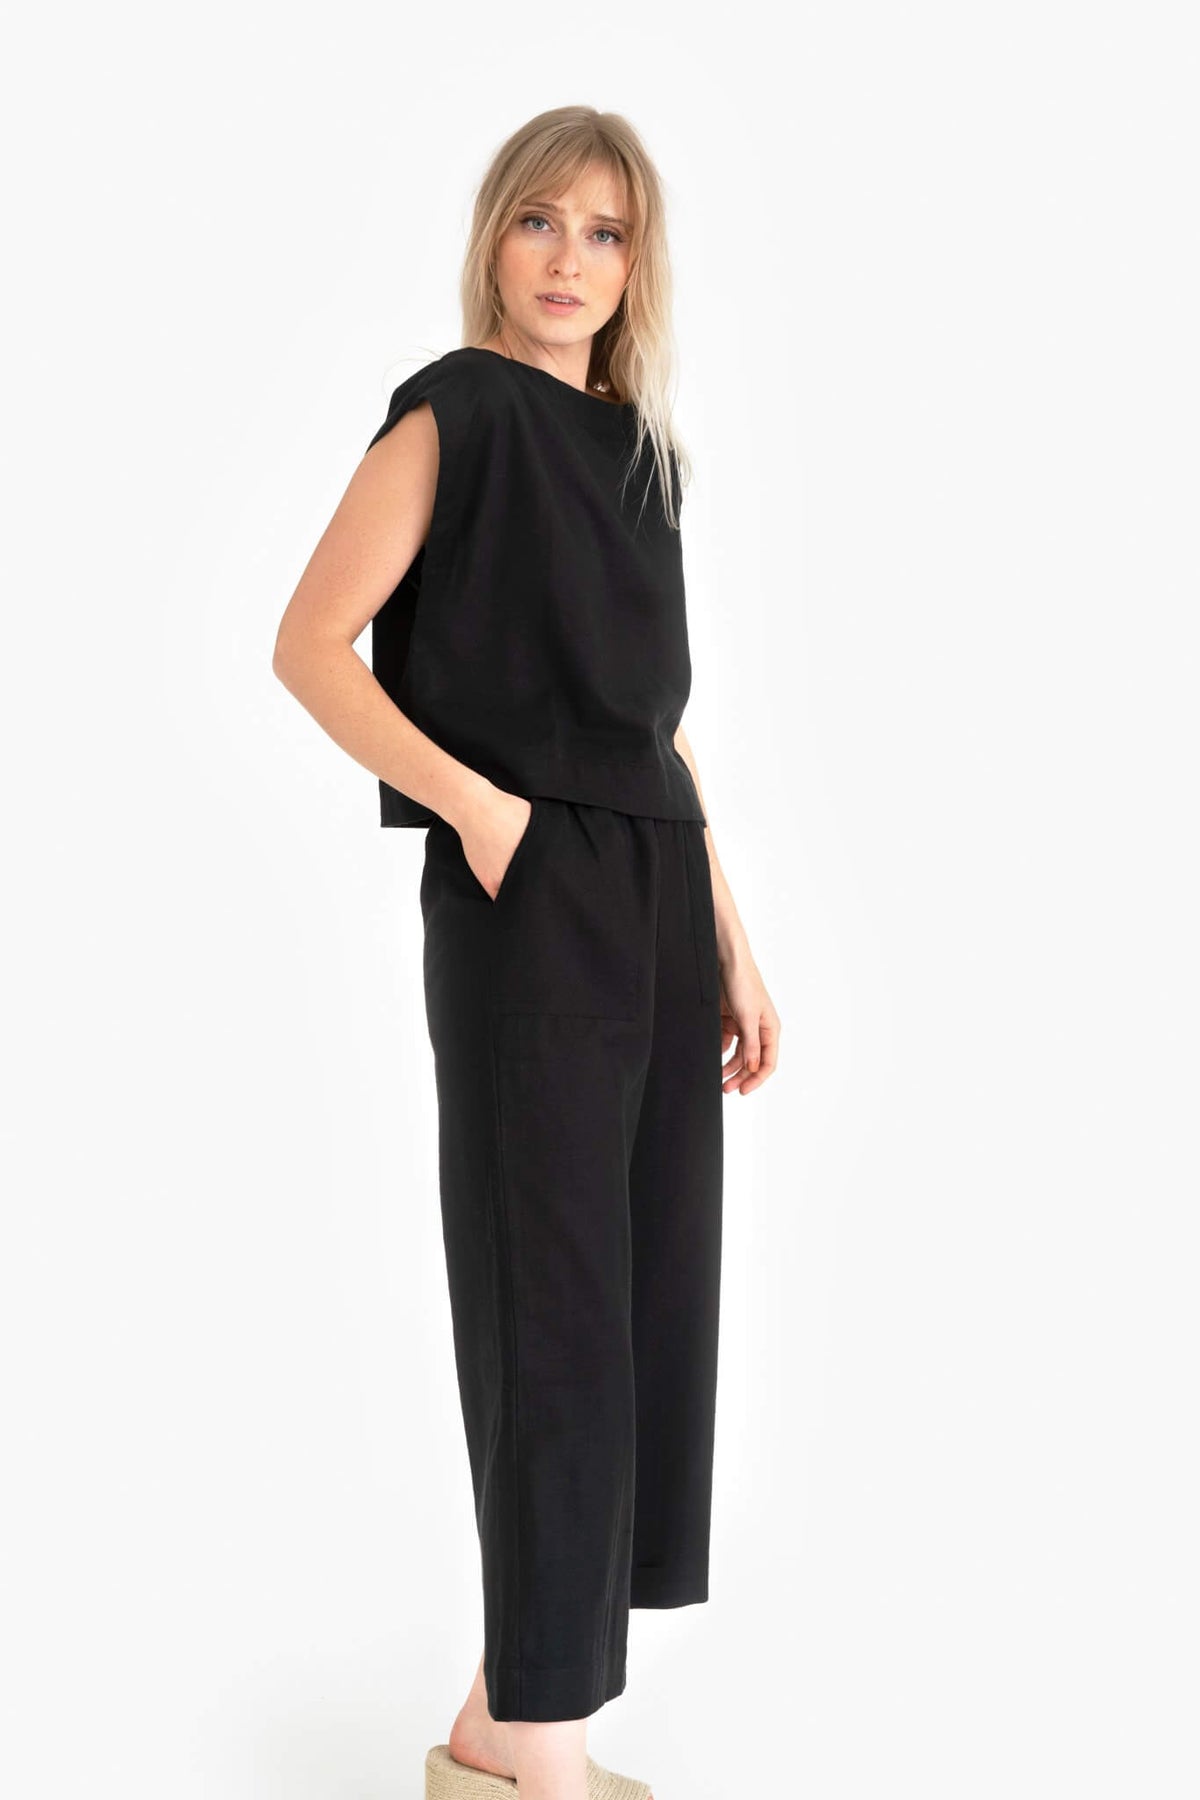 LAUDE The Label Everyday Top in Black